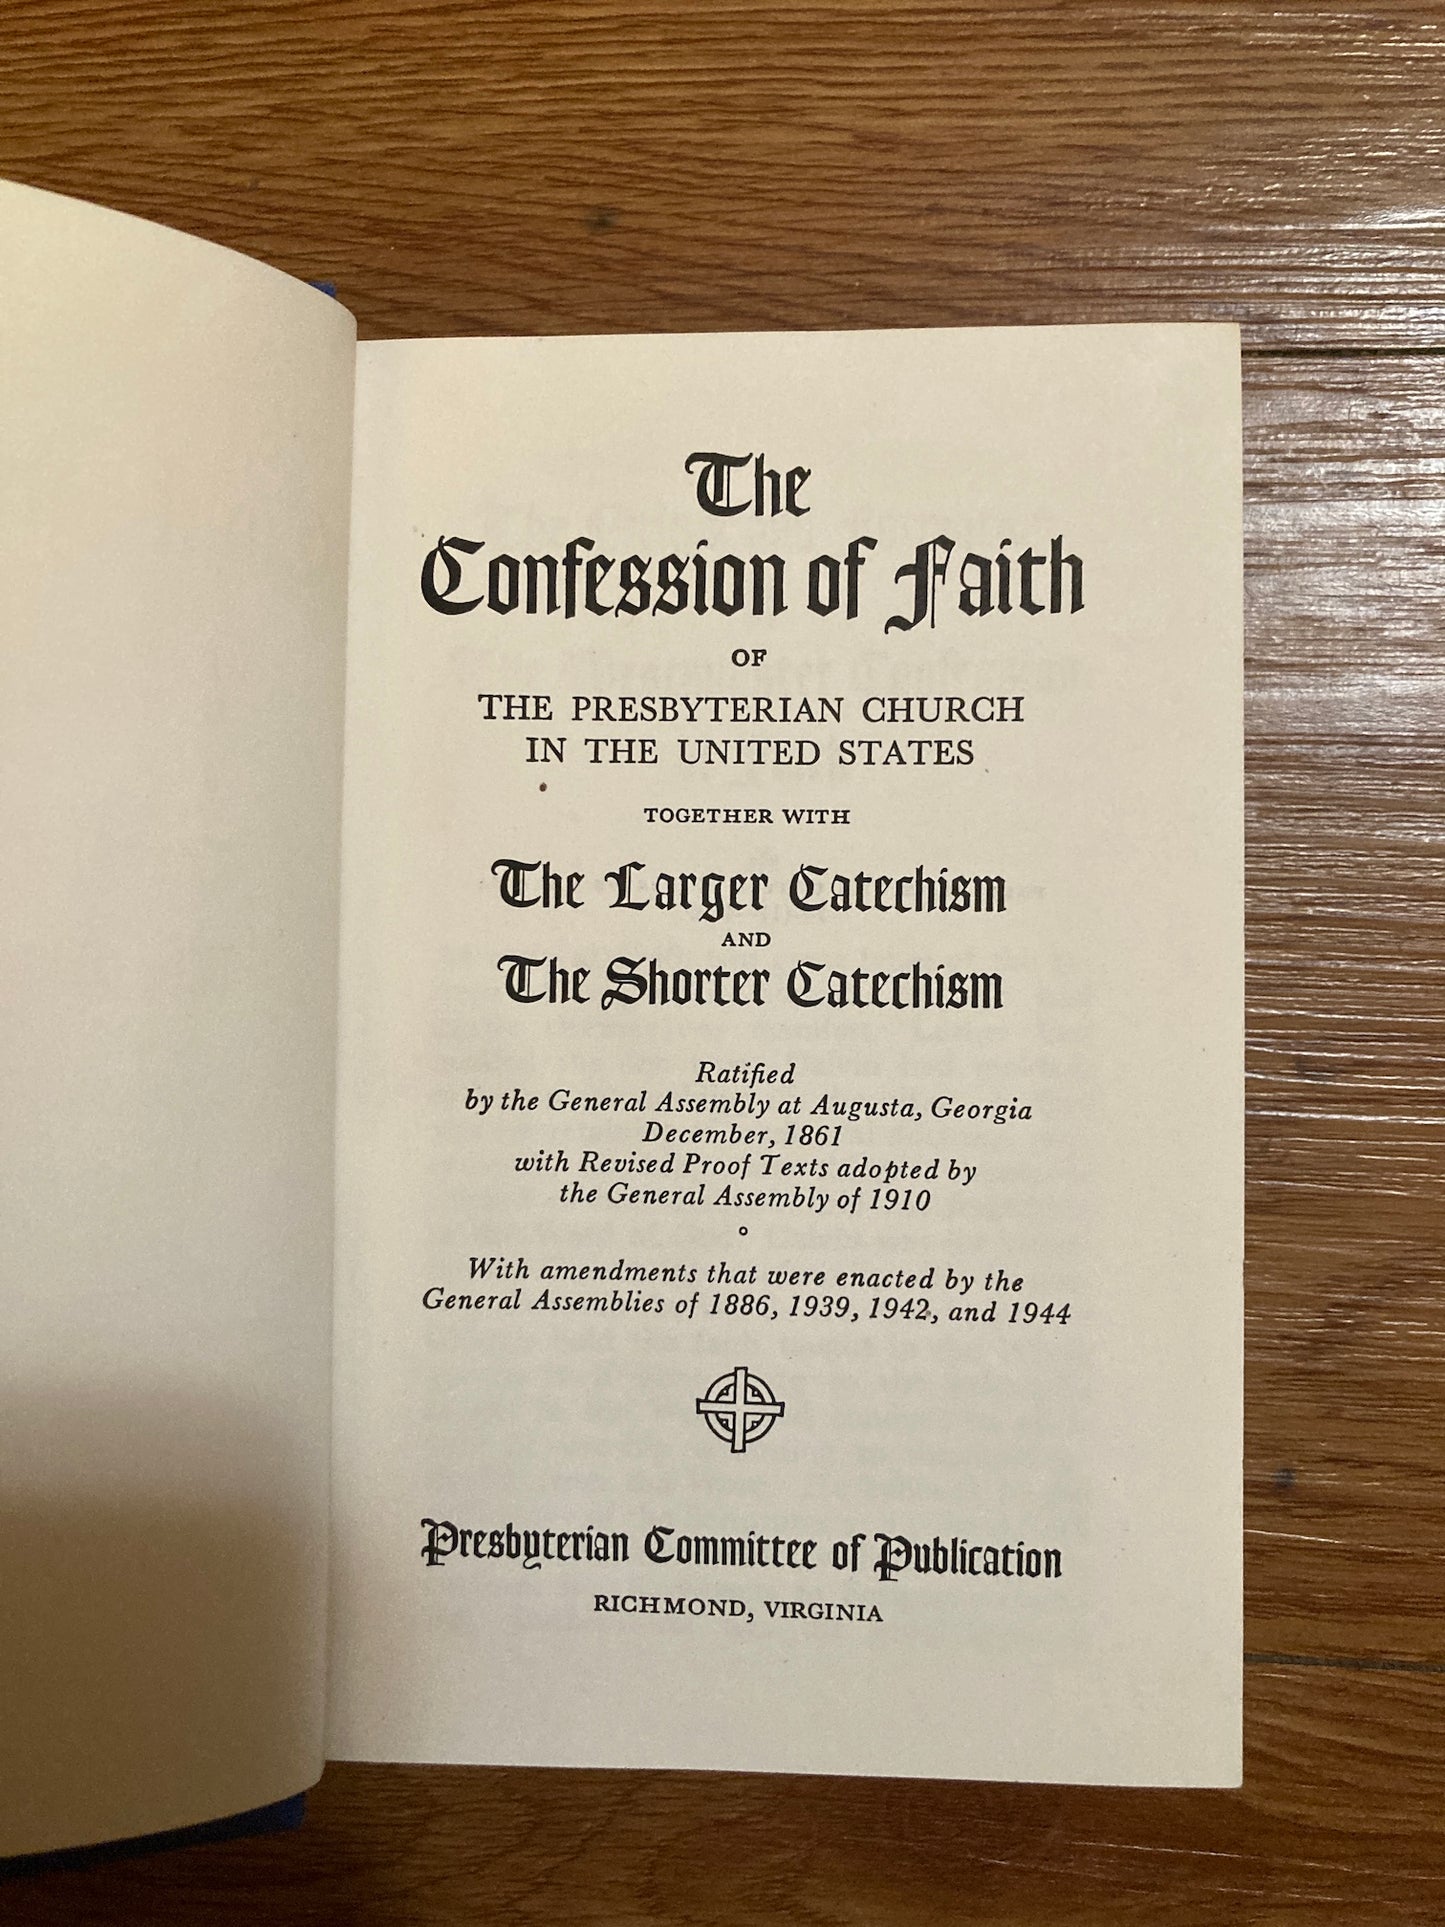 The Confession of Faith of the Presbyterian Church in the United States